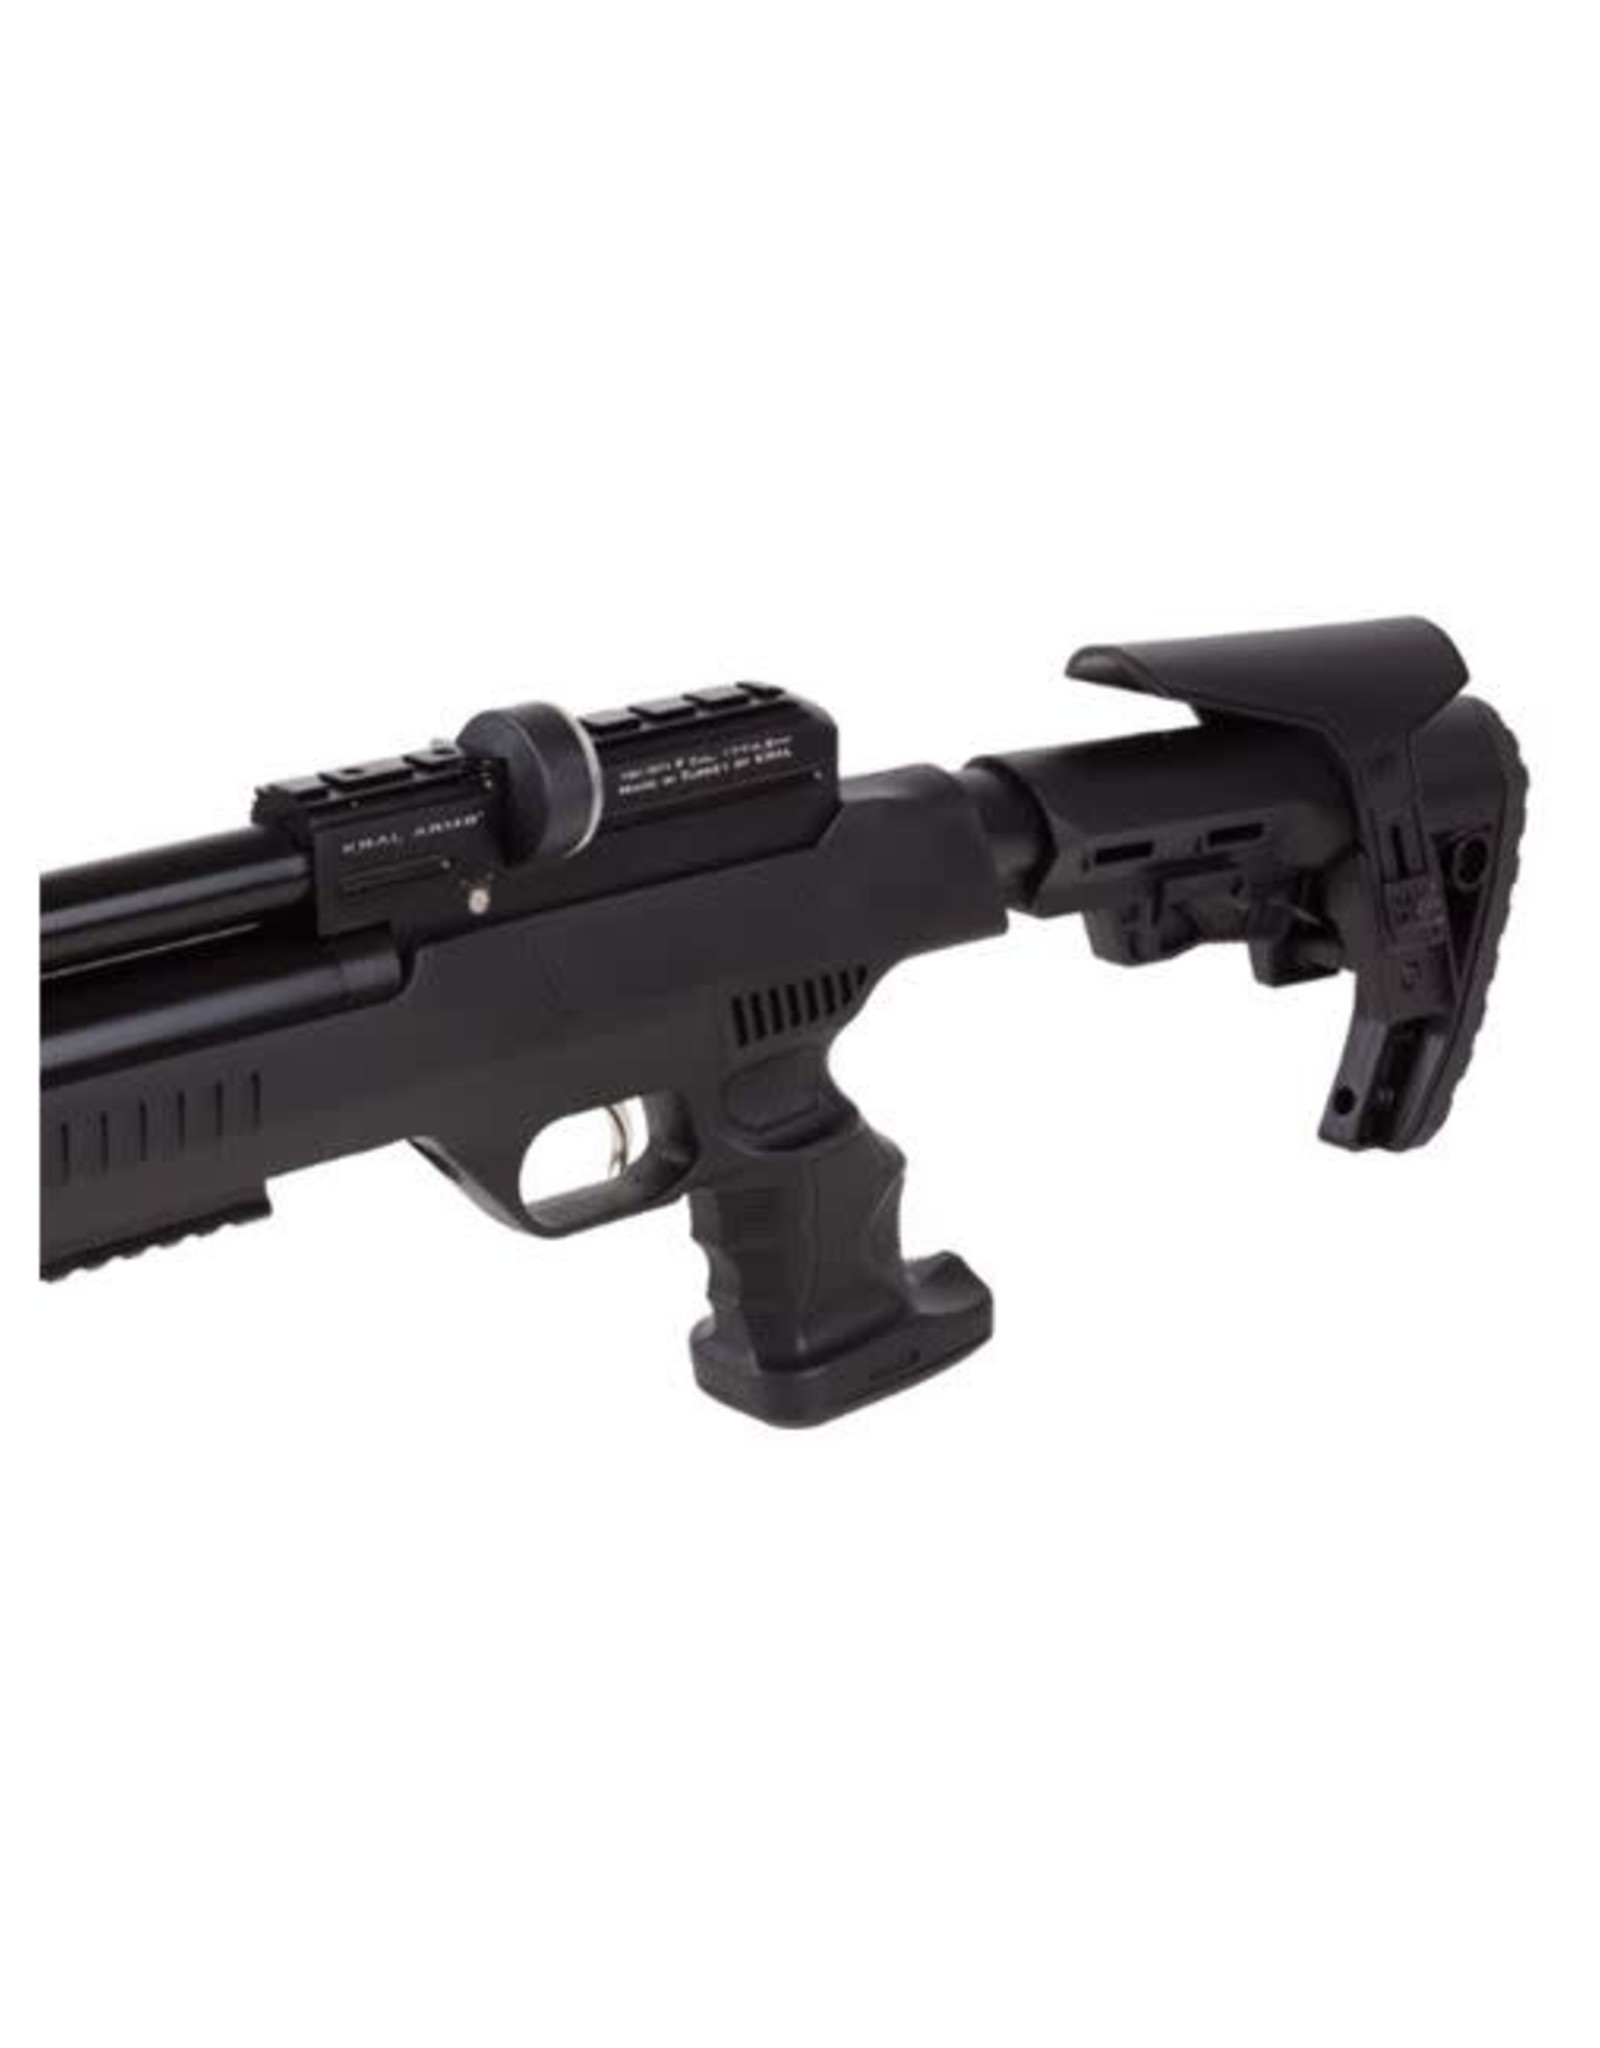 Kral Arms Kral Arms Puncher NP-03 PCP Carbine .25 Caliber (6.35mm) - Two 10 Round Magazines